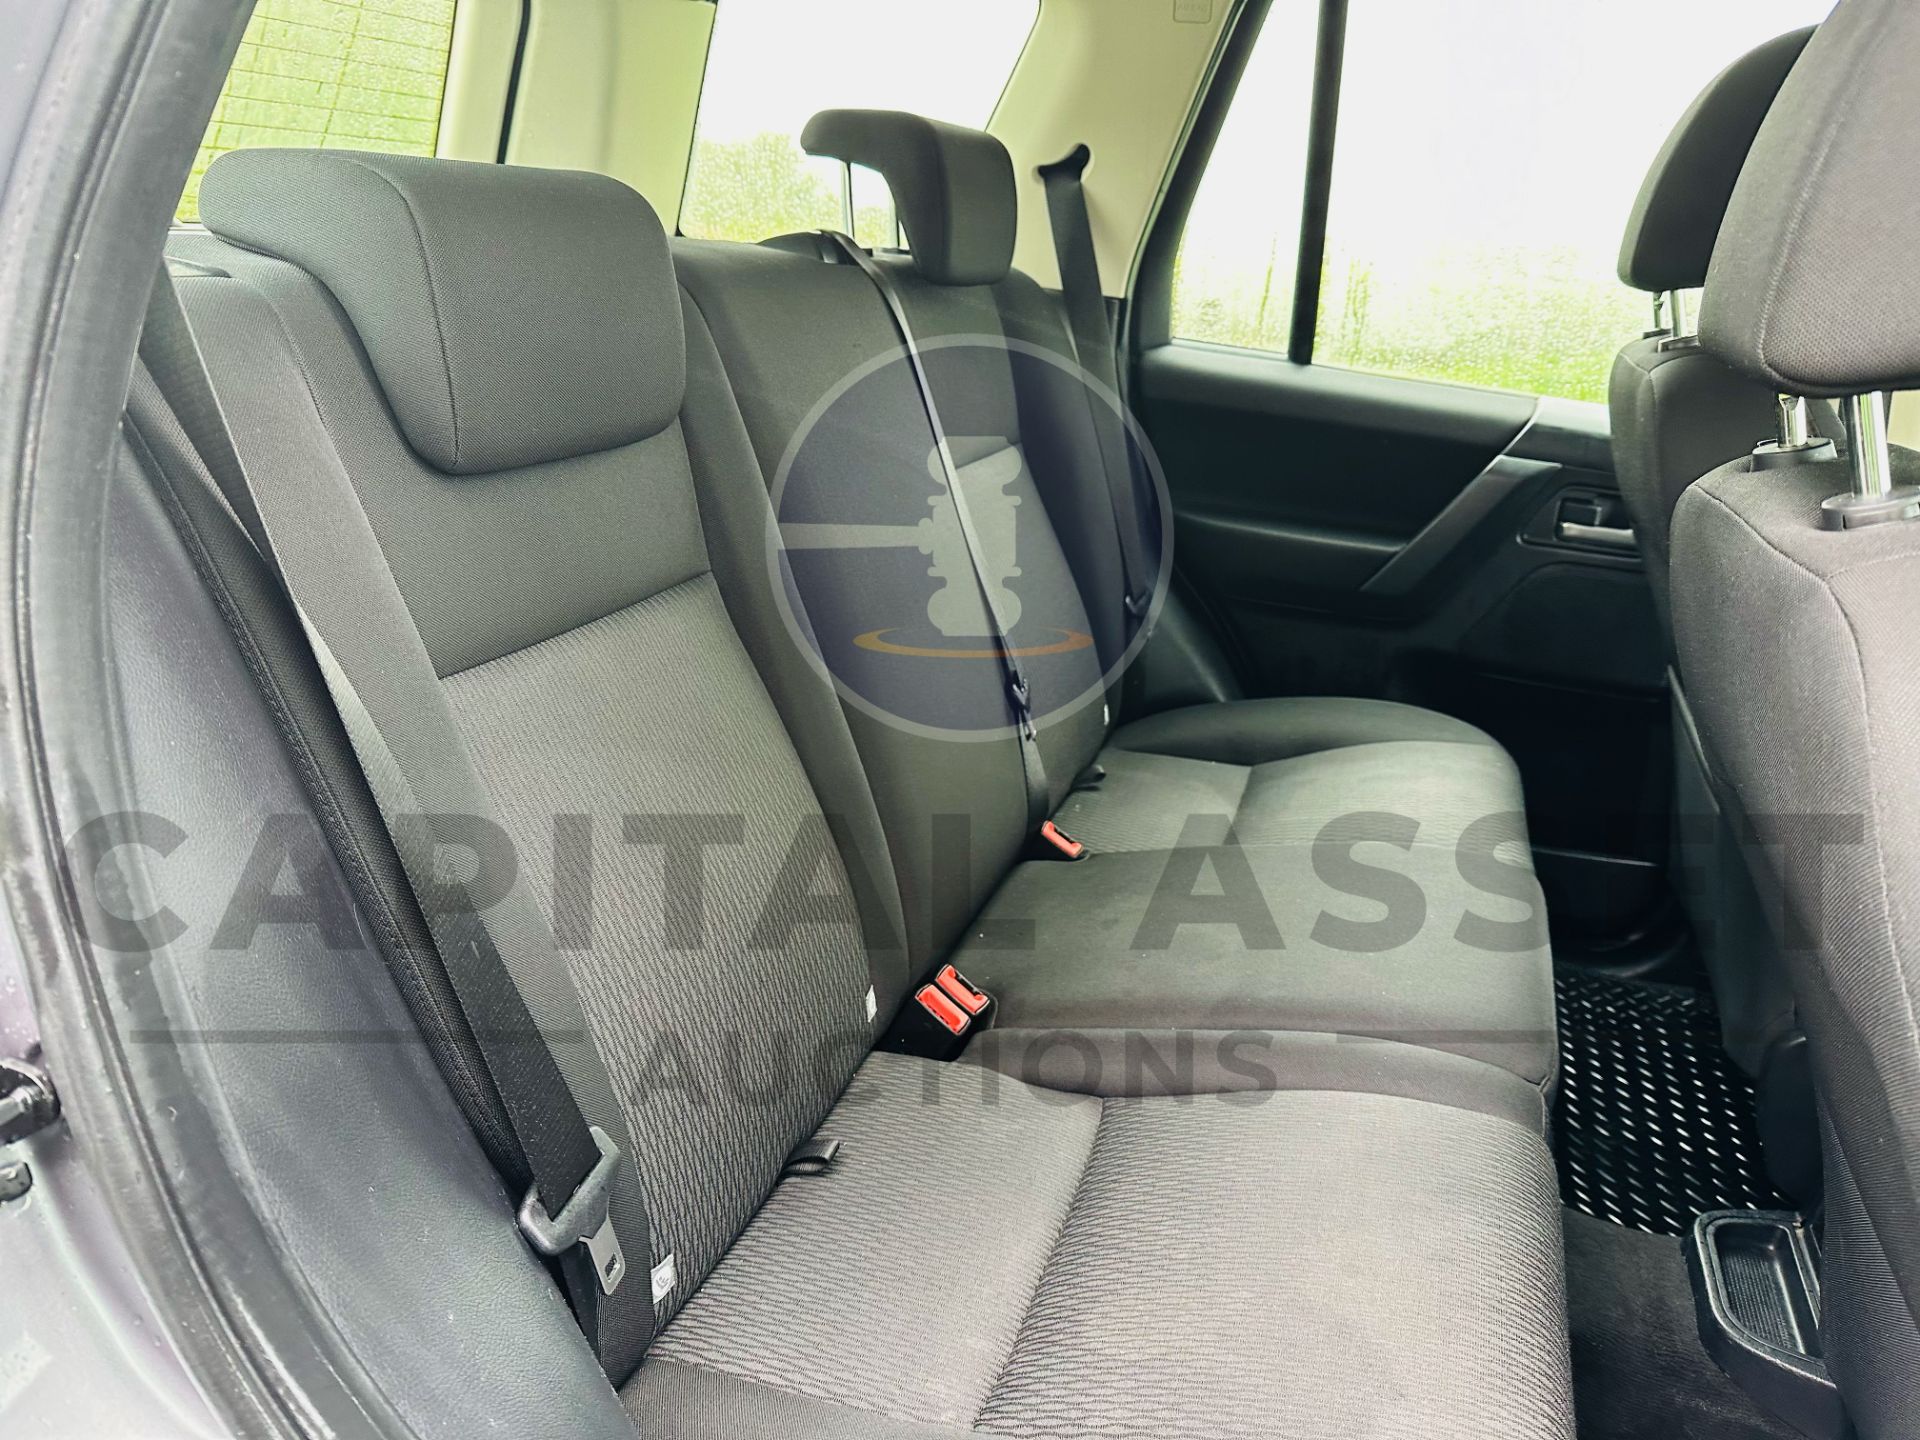 (ON SALE) LANDROVER FREELANDER 2.2TD4 S EDITION "AUTO - 2012 MODEL - AIR CON - FSH - Image 14 of 33